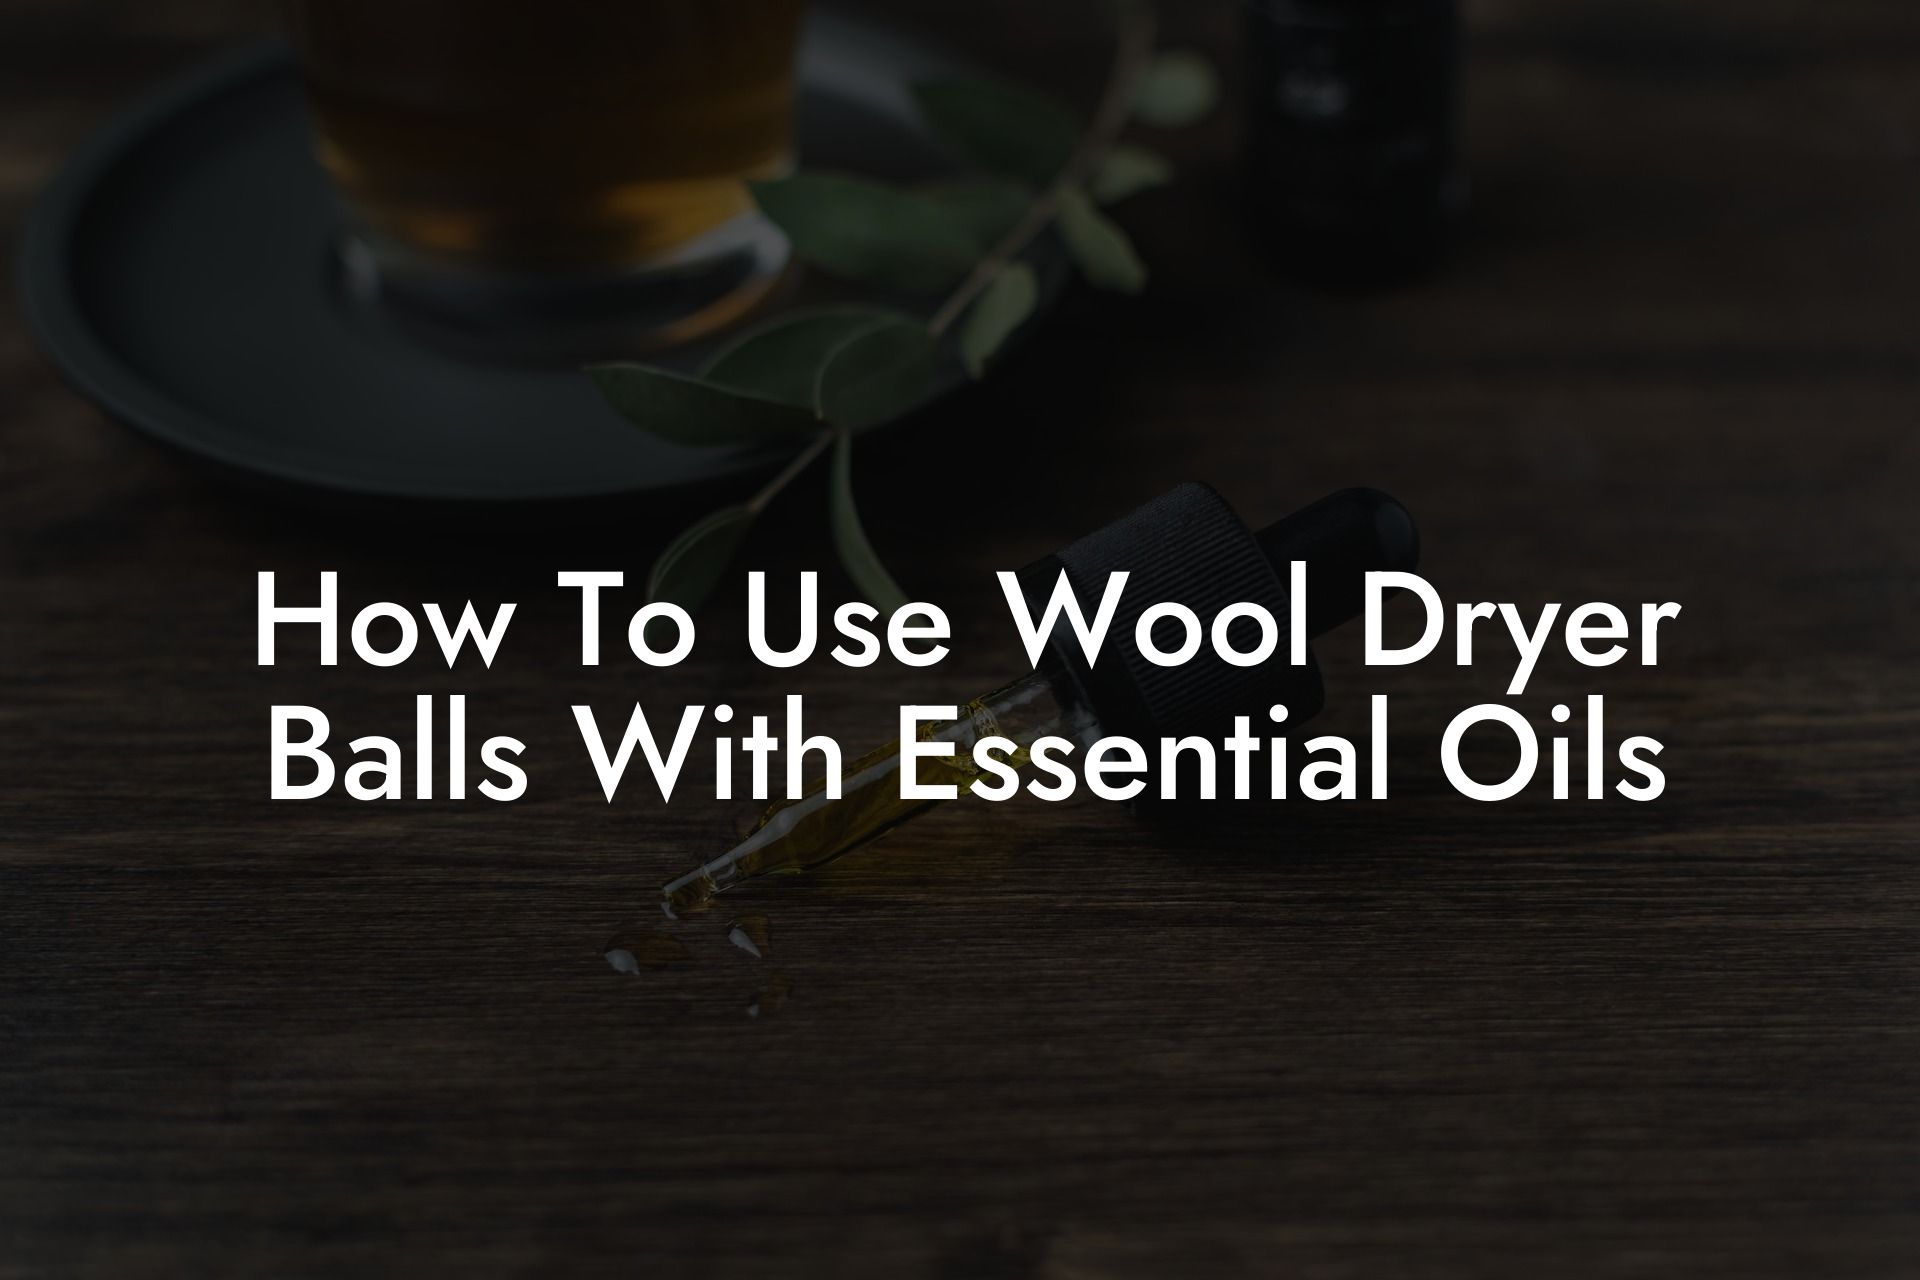 How To Use Wool Dryer Balls With Essential Oils